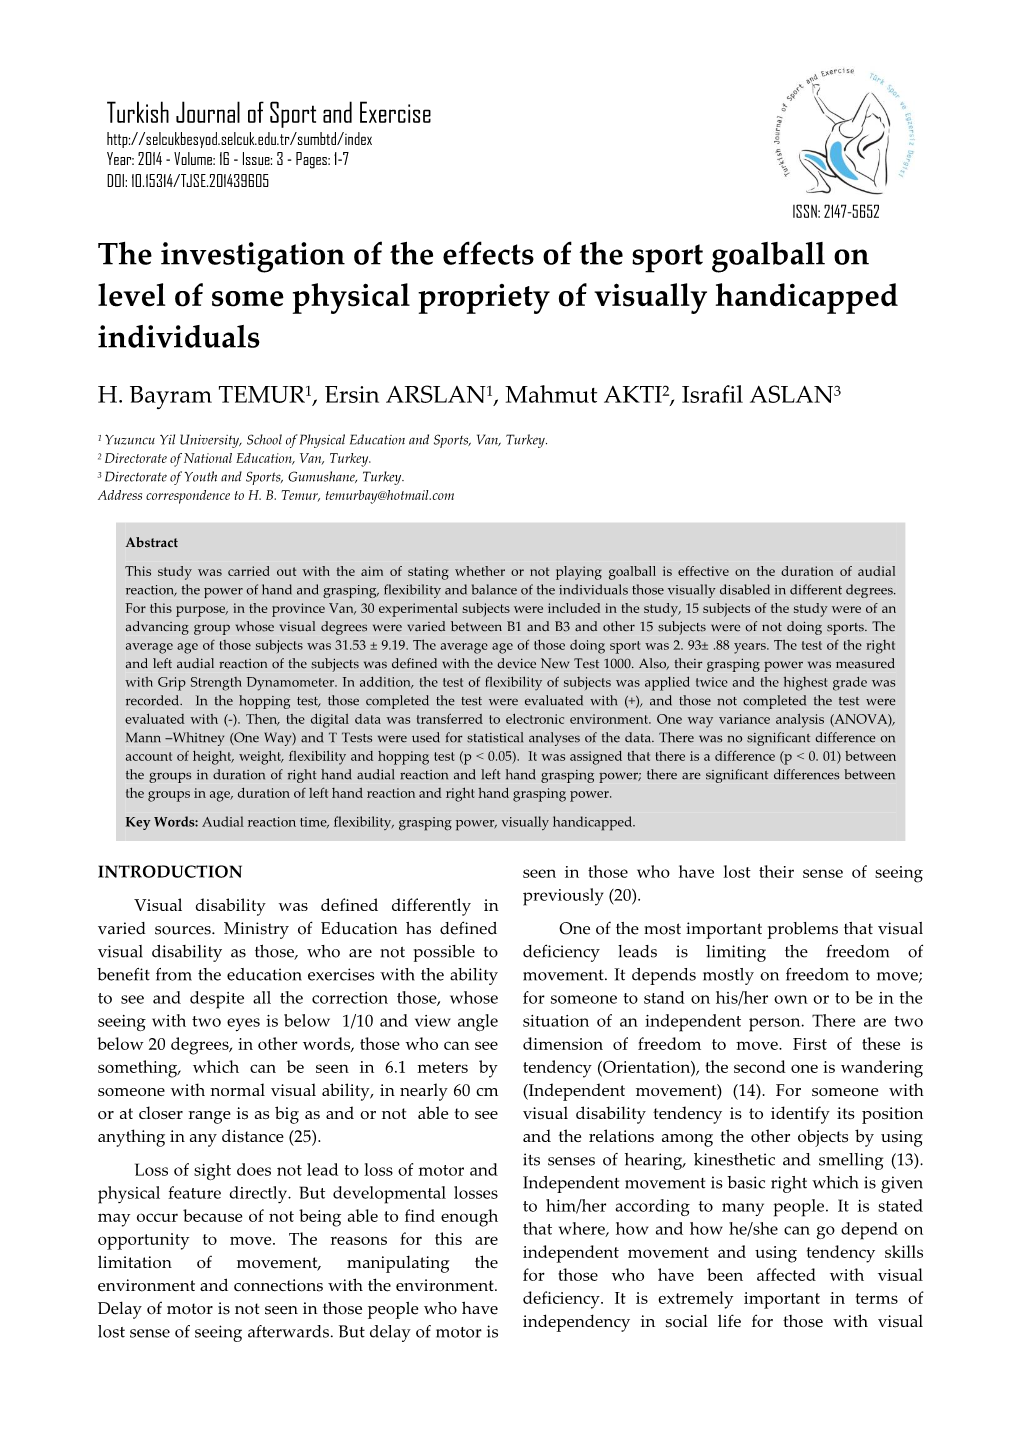 The Investigation of the Effects of the Sport Goalball on Level of Some Physical Propriety of Visually Handicapped Individuals